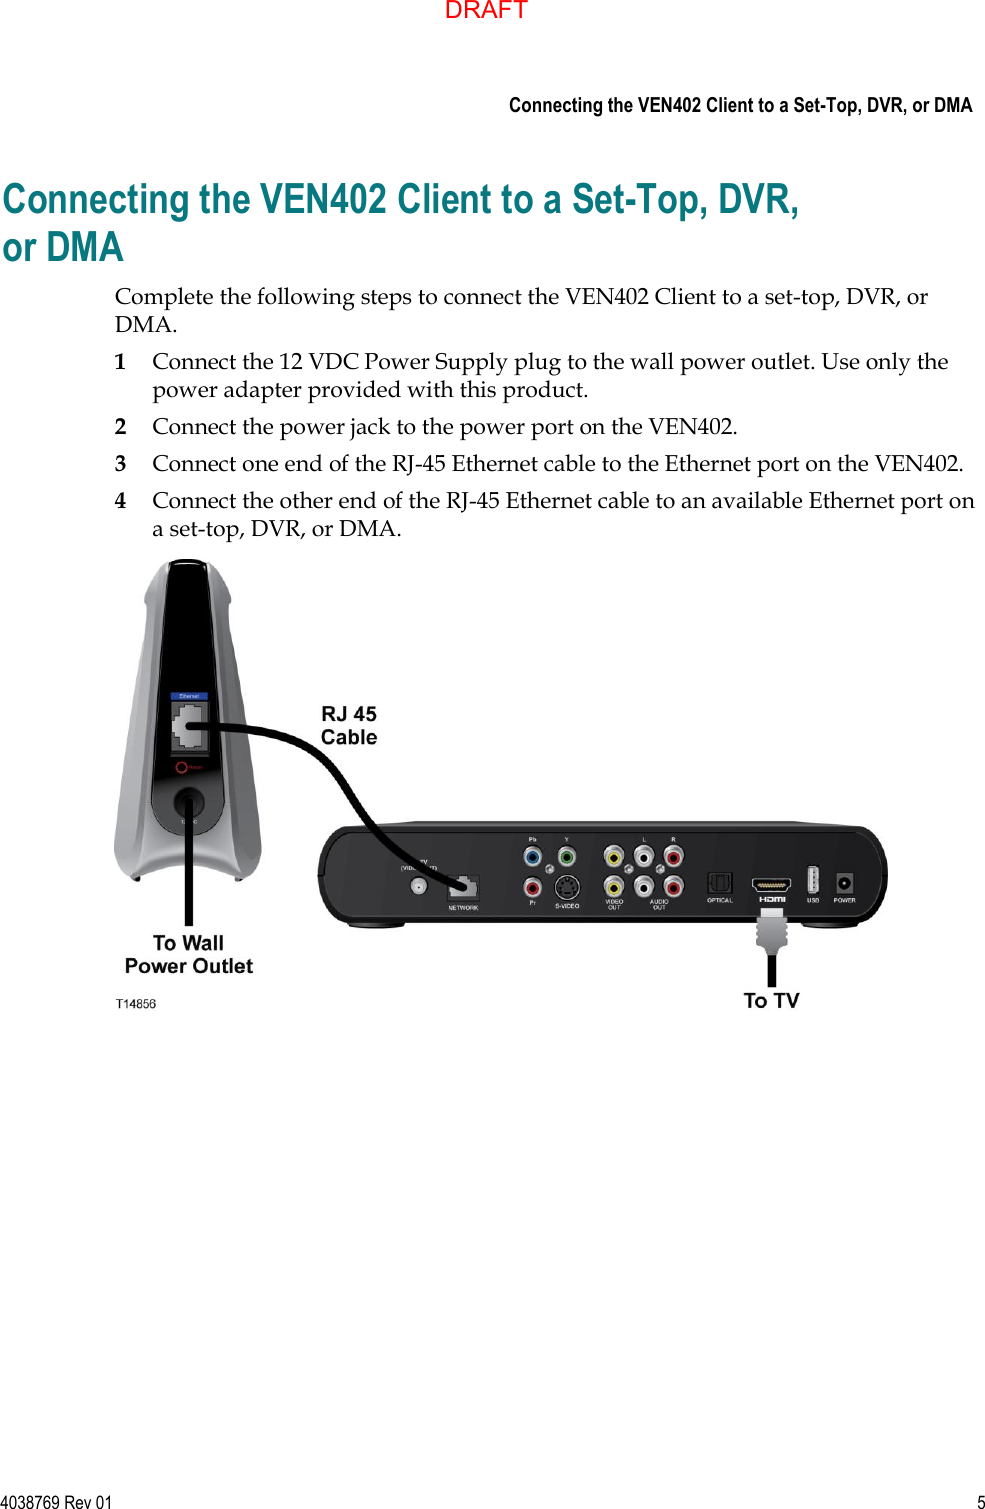     Connecting the VEN402 Client to a Set-Top, DVR, or DMA  4038769 Rev 01  5  Connecting the VEN402 Client to a Set-Top, DVR, or DMA Complete the following steps to connect the VEN402 Client to a set-top, DVR, or DMA. 1 Connect the 12 VDC Power Supply plug to the wall power outlet. Use only the power adapter provided with this product. 2 Connect the power jack to the power port on the VEN402. 3 Connect one end of the RJ-45 Ethernet cable to the Ethernet port on the VEN402. 4 Connect the other end of the RJ-45 Ethernet cable to an available Ethernet port on a set-top, DVR, or DMA.   DRAFT